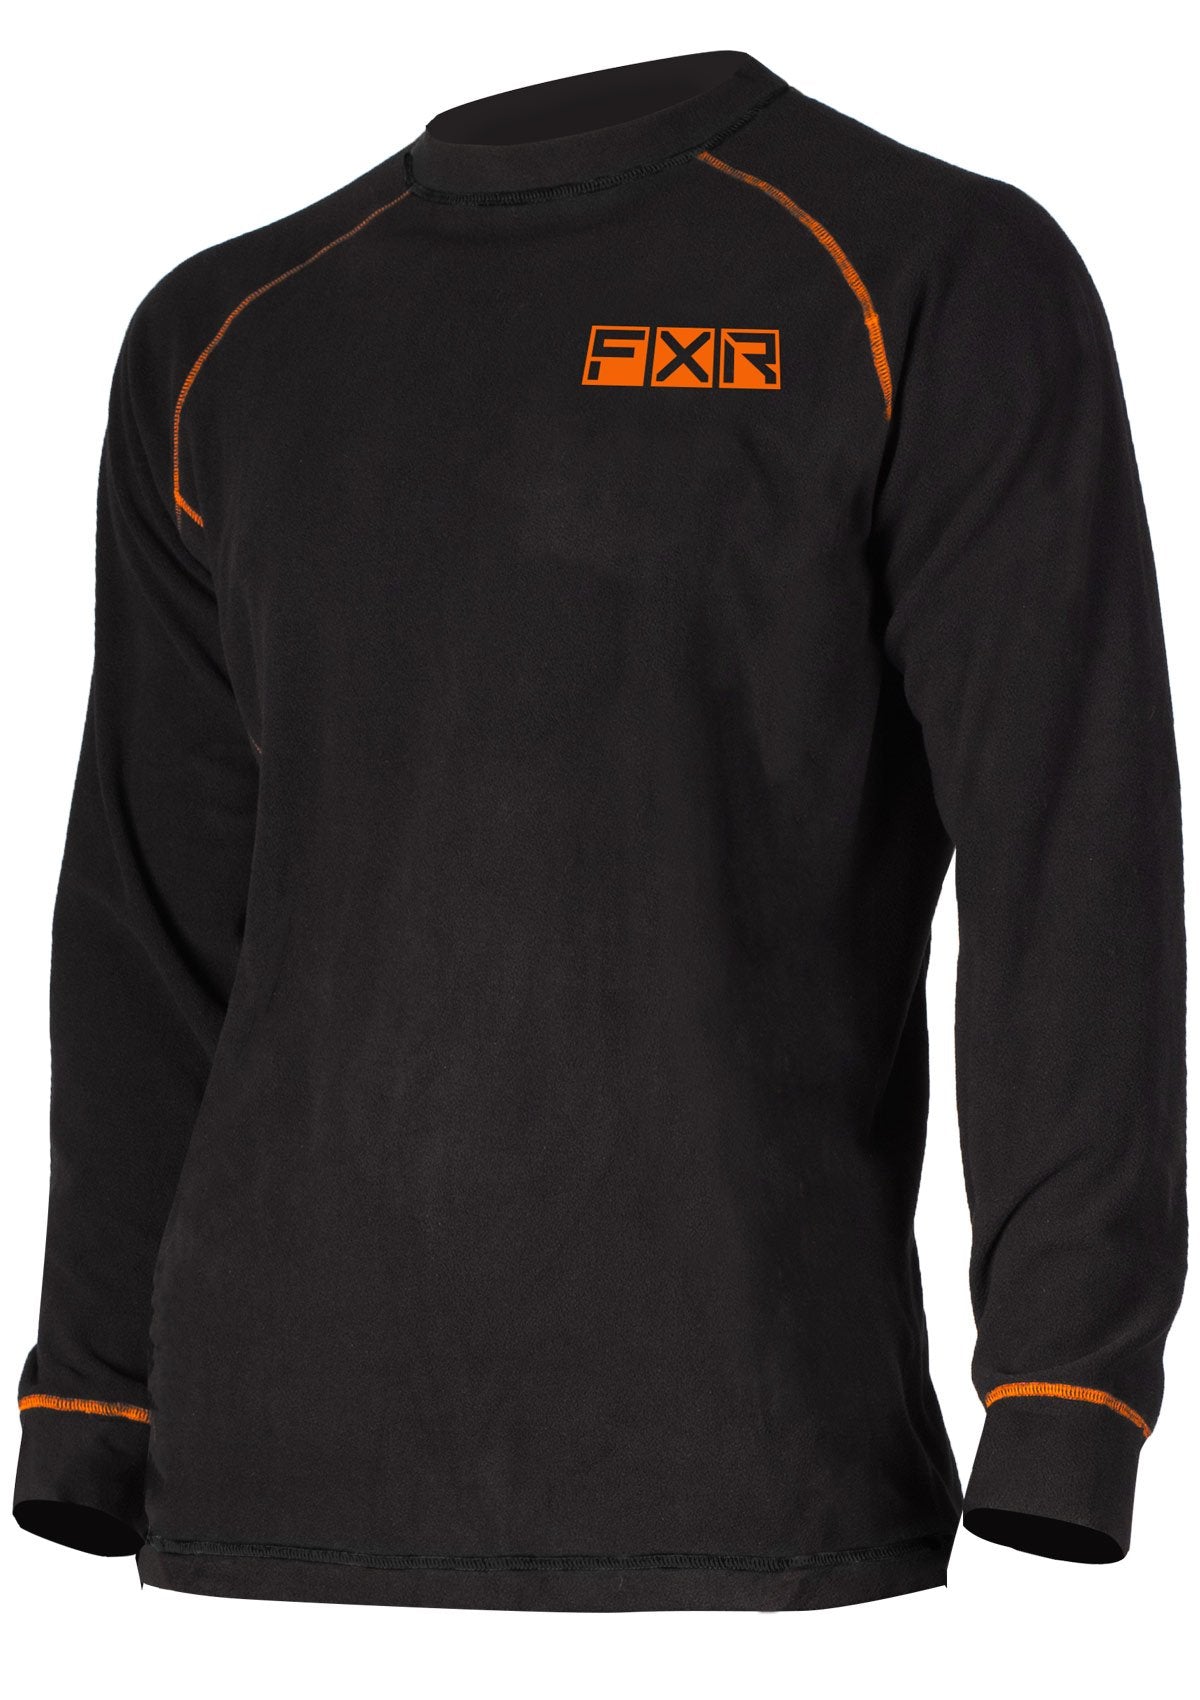 FXR Pyro Thermal Longsleeve 21 pour homme